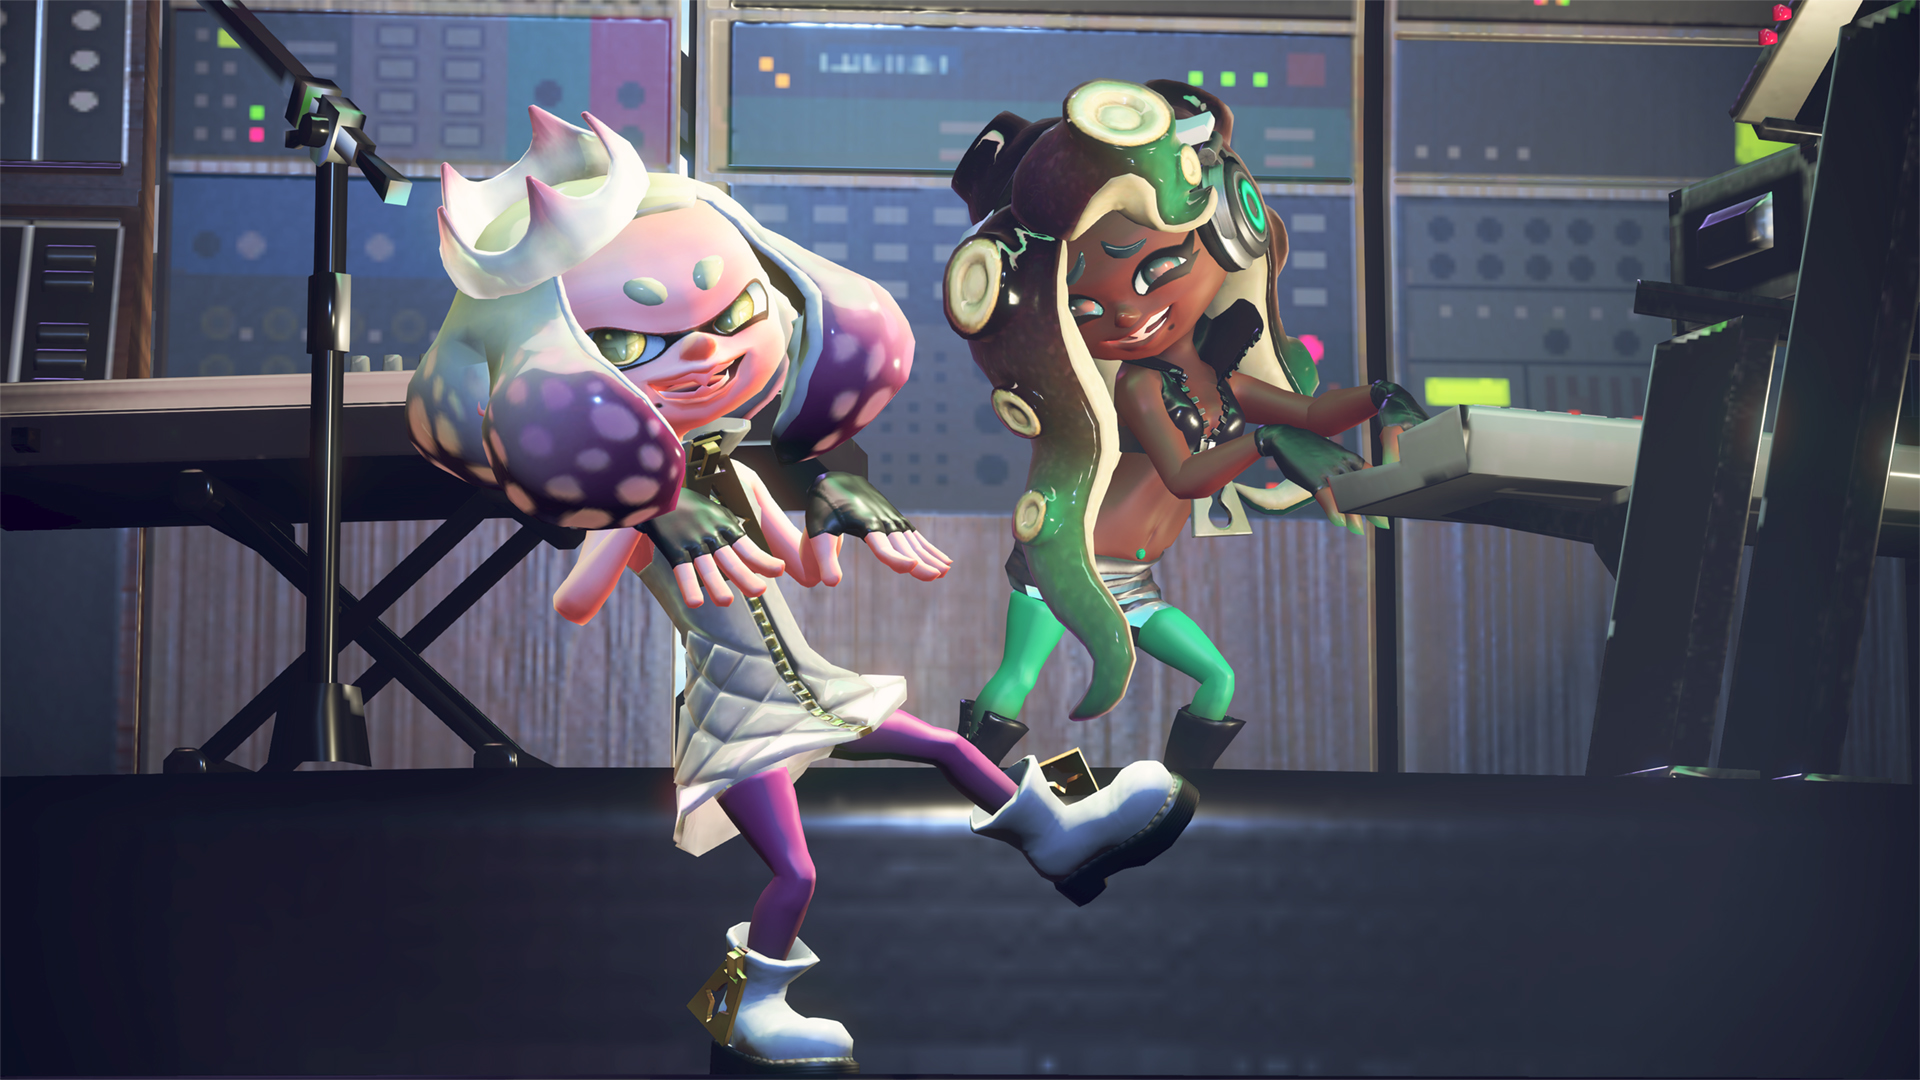 10 characters we want super smash bros for switch splatoon2 scrn splatfest 01 off the hook